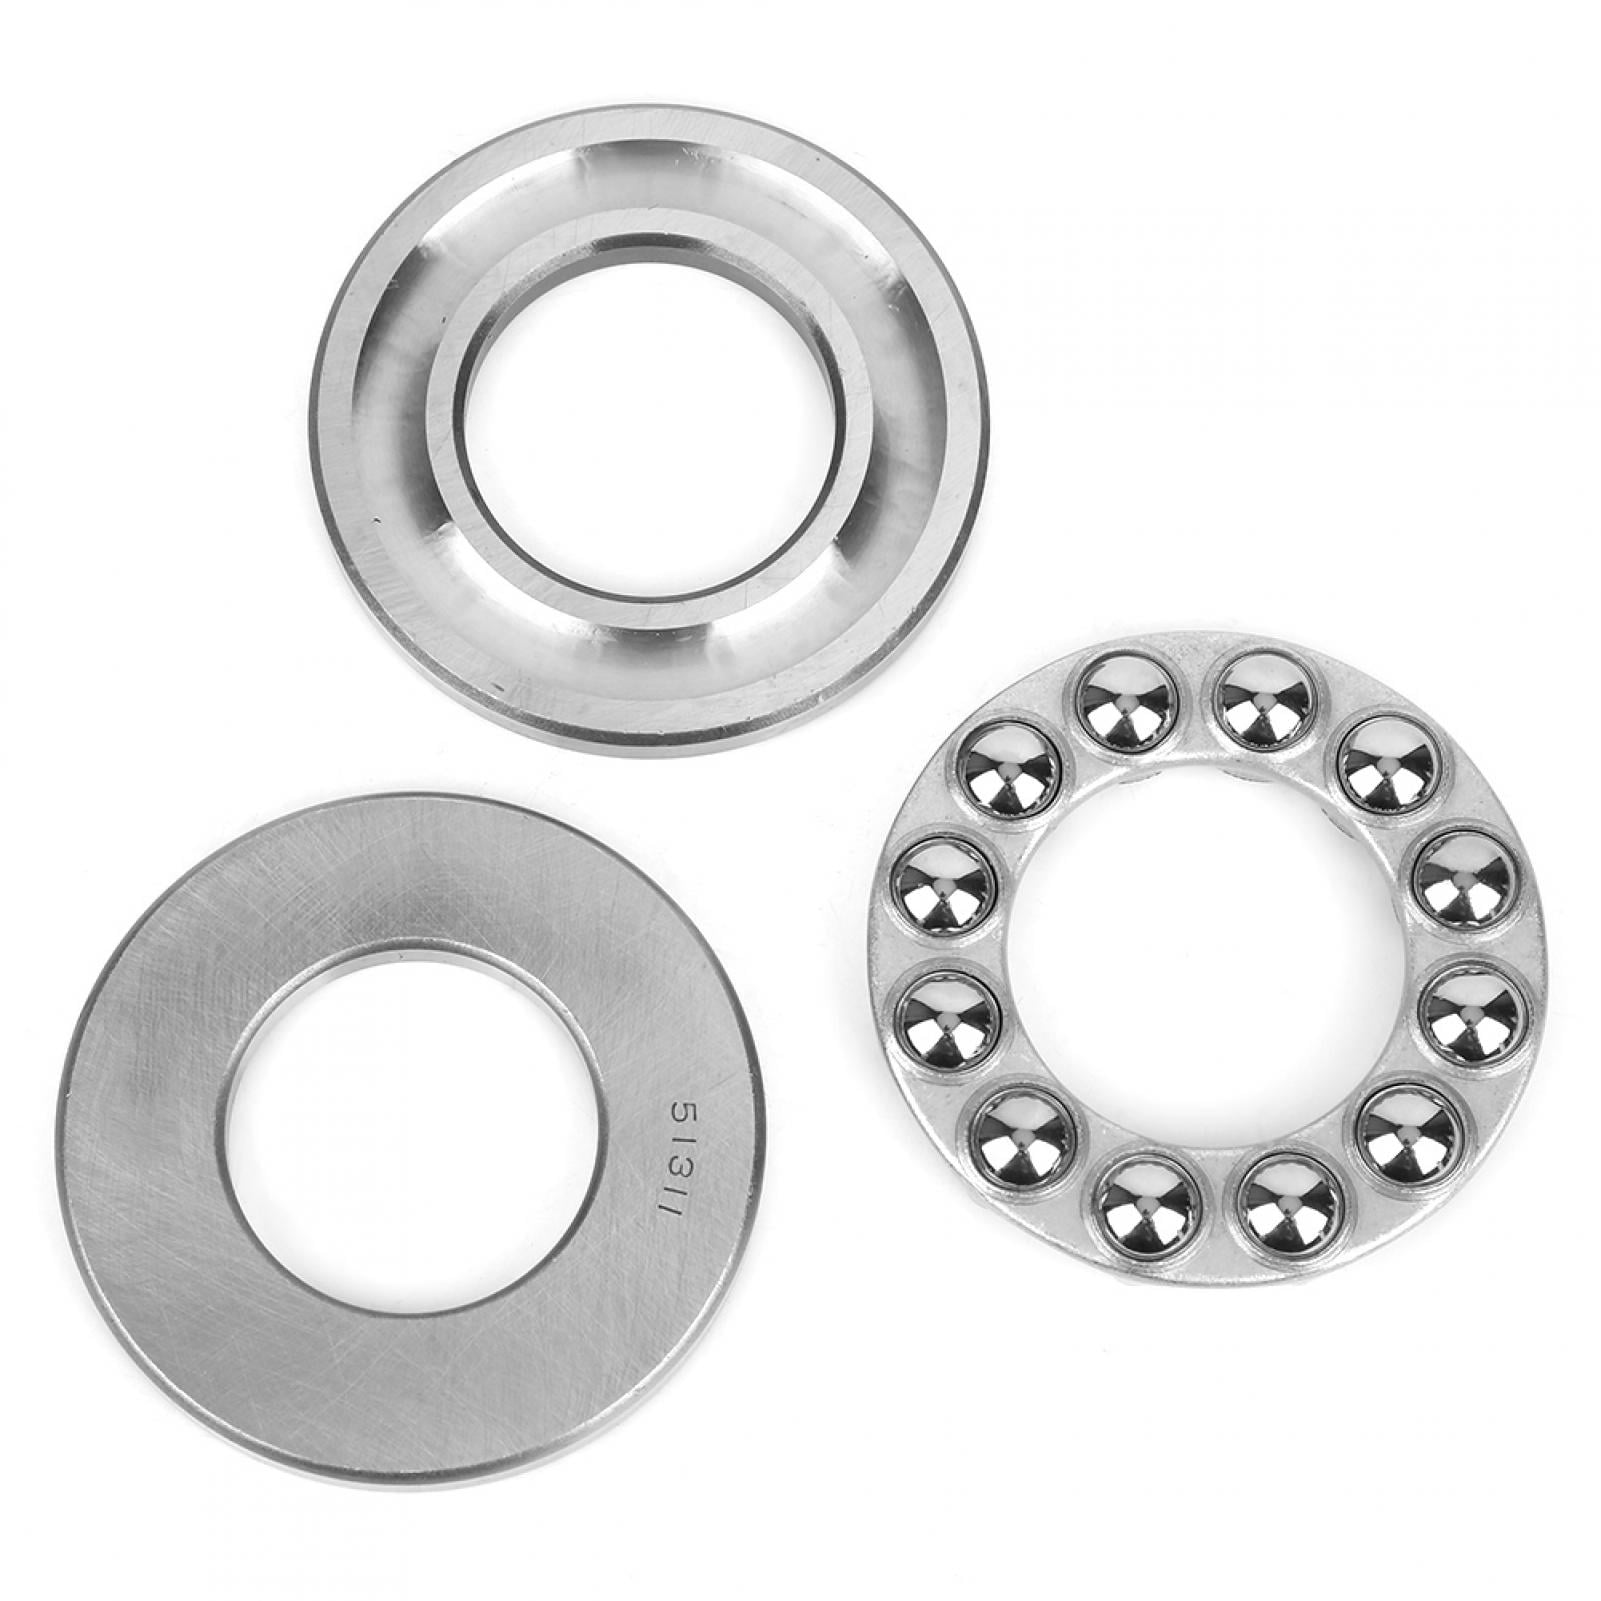 Axial Thrust Ball Bearing 51311 High Accuracy Plane Pressure Industrial Accessories for 51311 